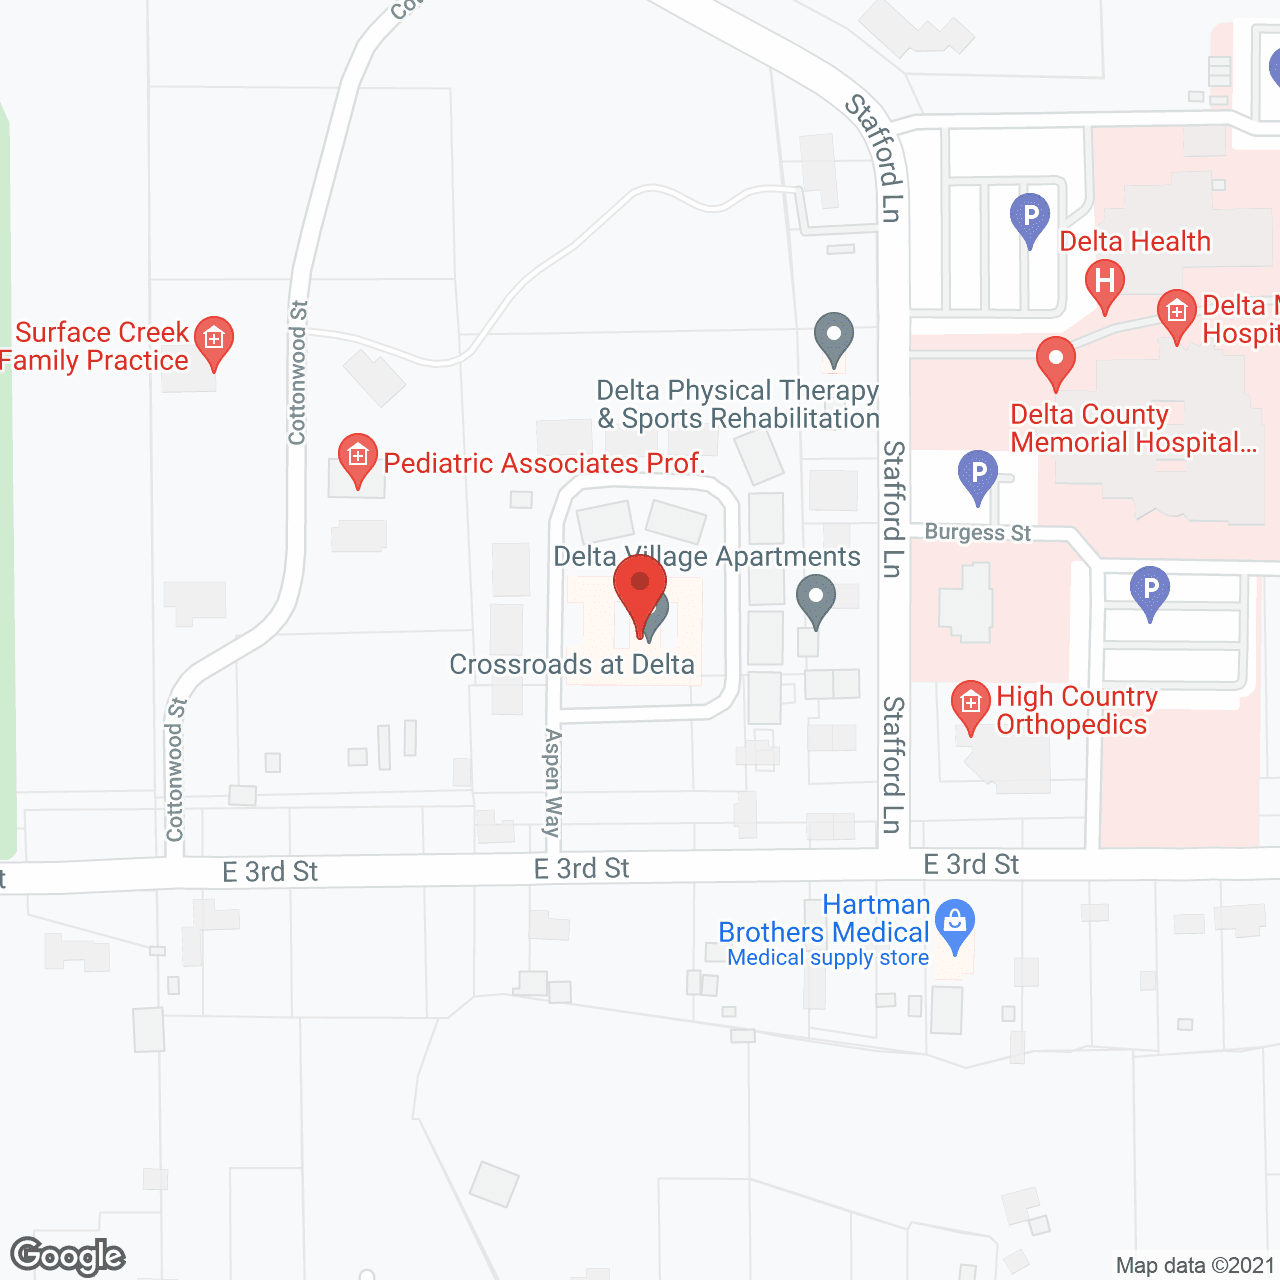 Crossroads at Delta in google map